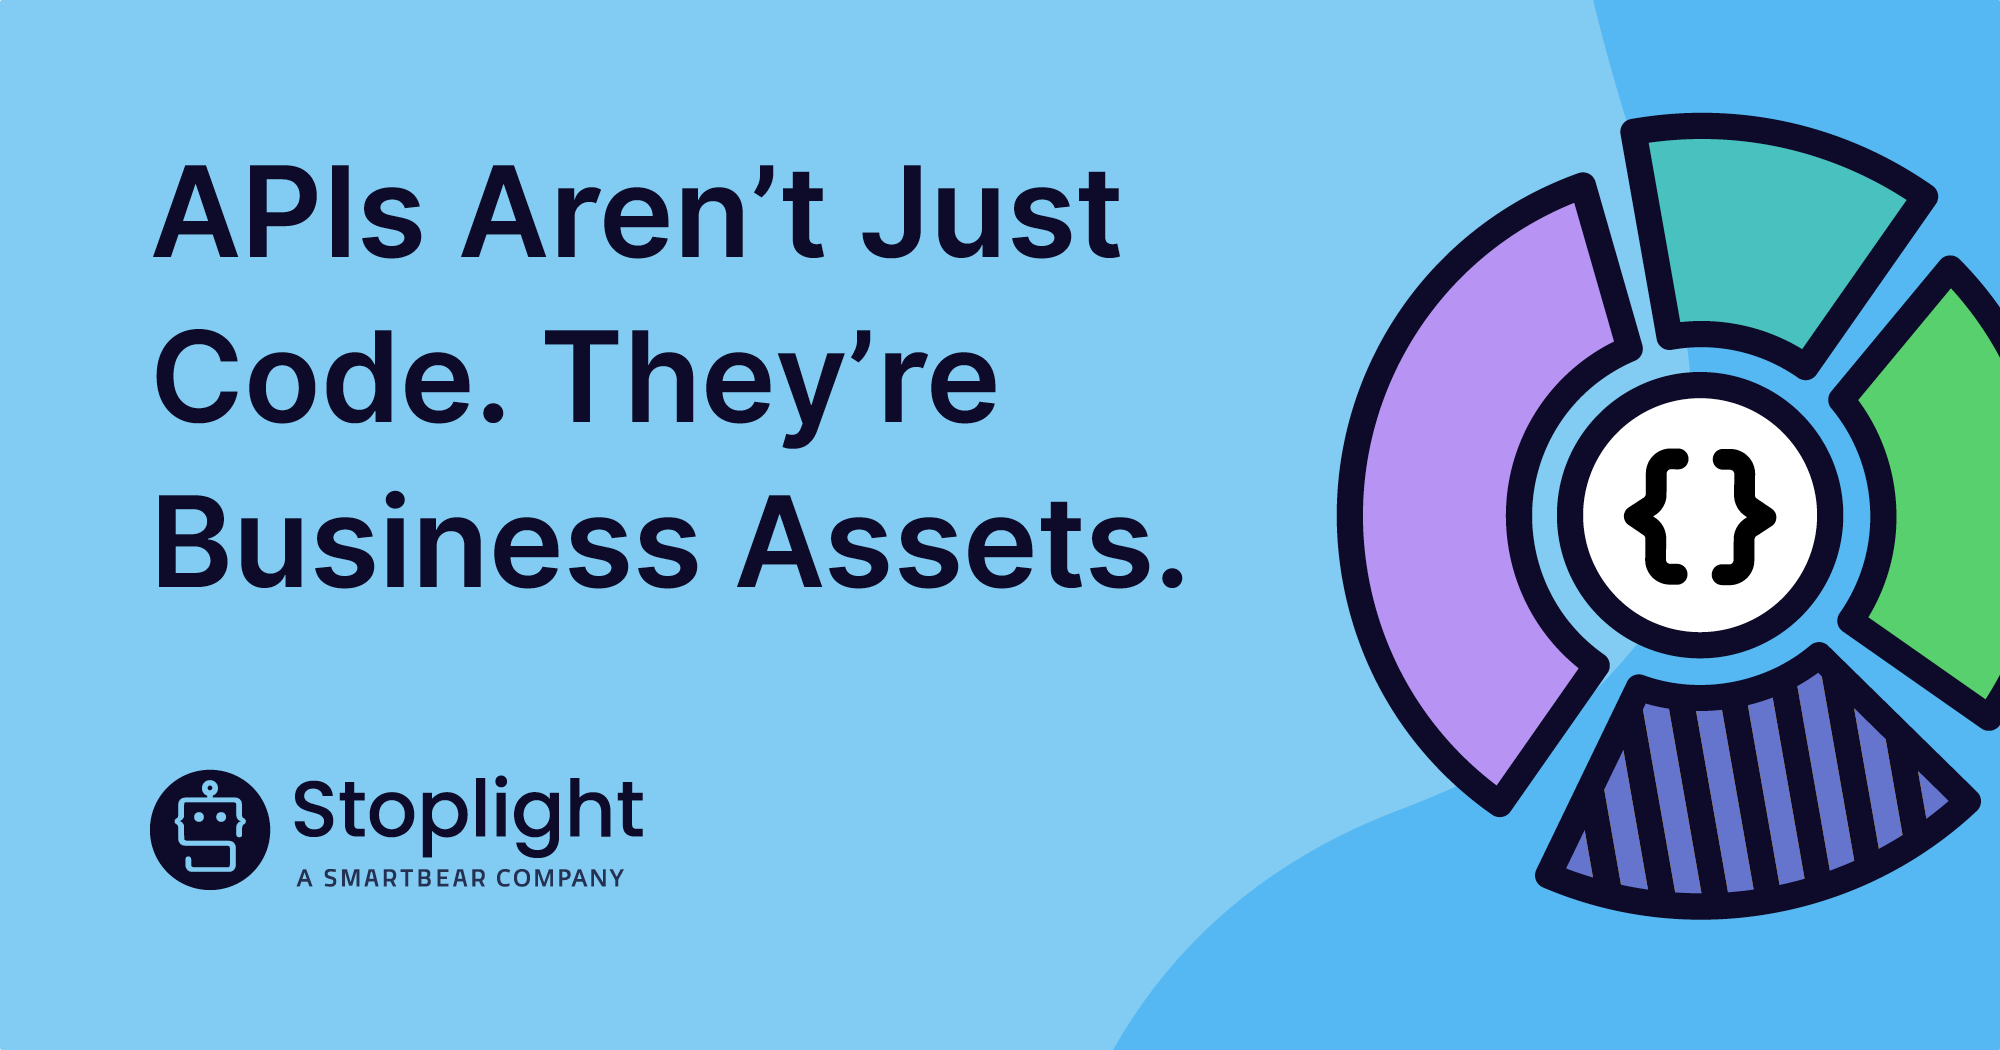 APIs Aren’t Just Code. They’re Business Assets. 